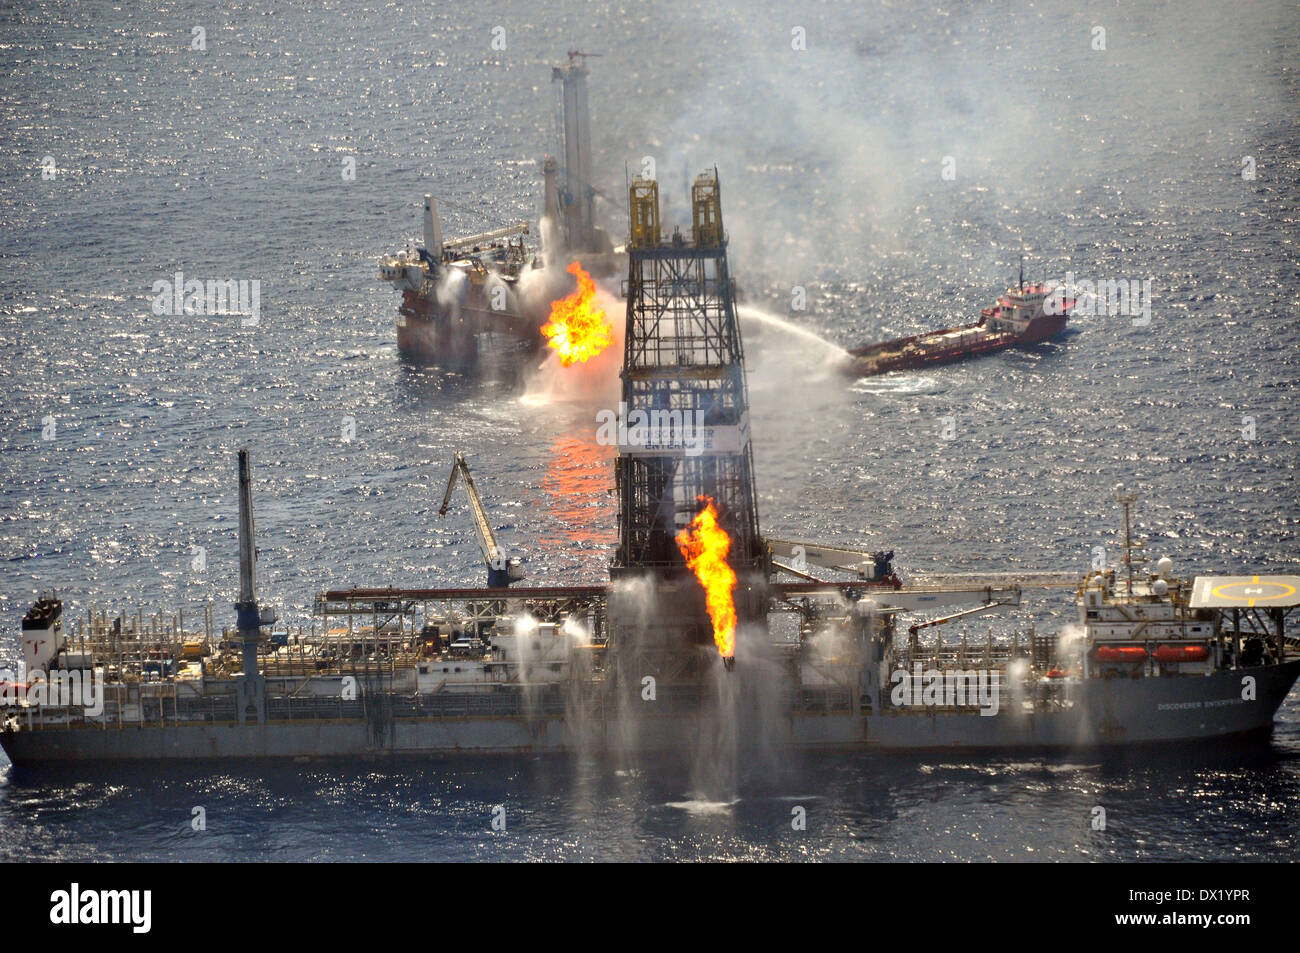 The drill ship Discoverer Enterprise and Q4000 burn off gas from the uncapped Deepwater Horizon wellhead as clean up continues in the largest oil disaster in history June 26, 2010 in the Gulf of Mexico. Stock Photo